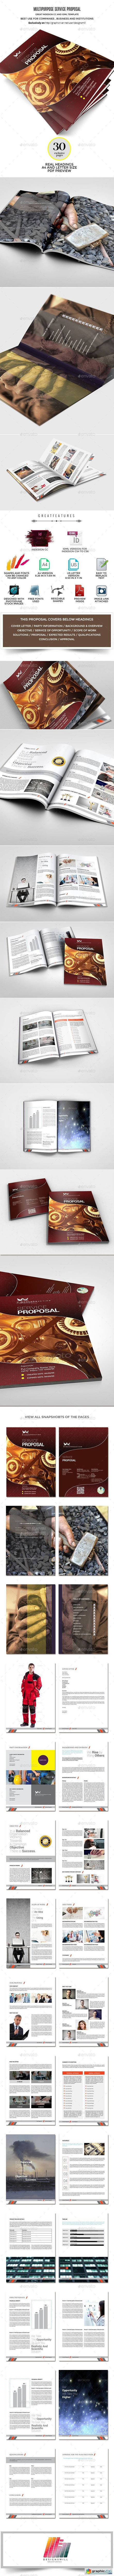 Wings Multipurpose InDesign Service Proposal